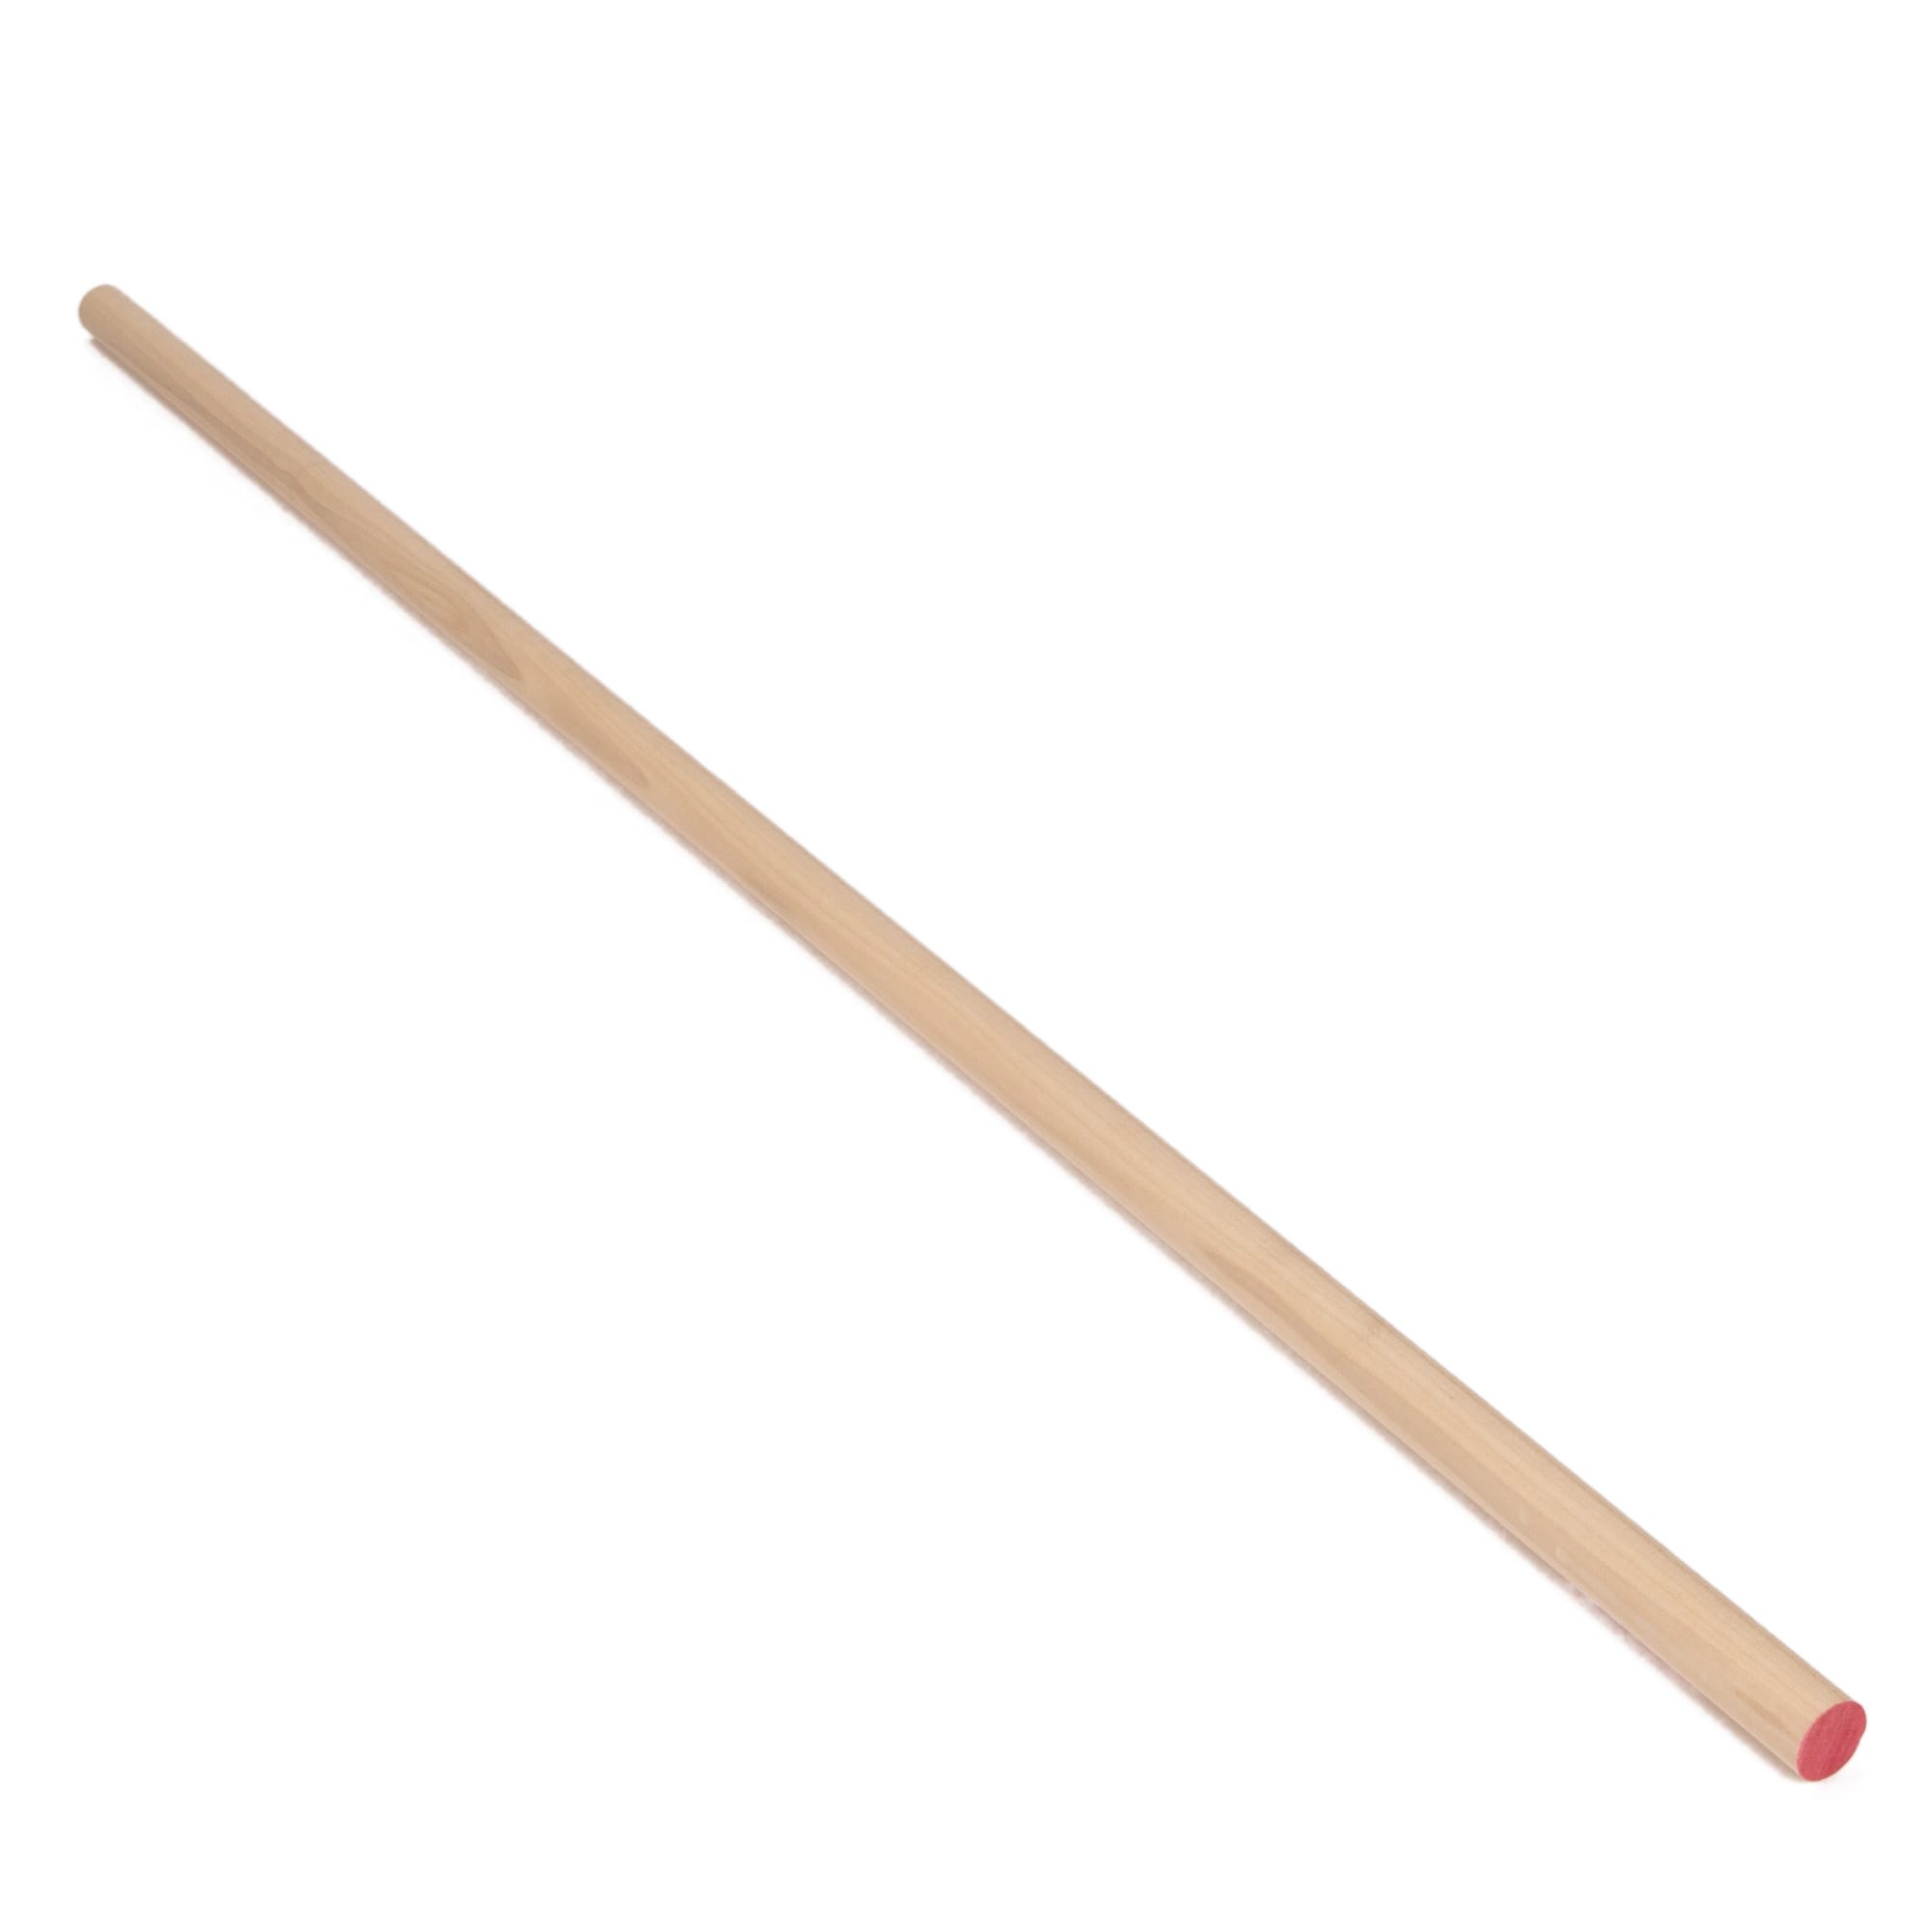 1 X 48 Wood Dowel - (Available For Local Pick Up Only) - Greschlers  Hardware